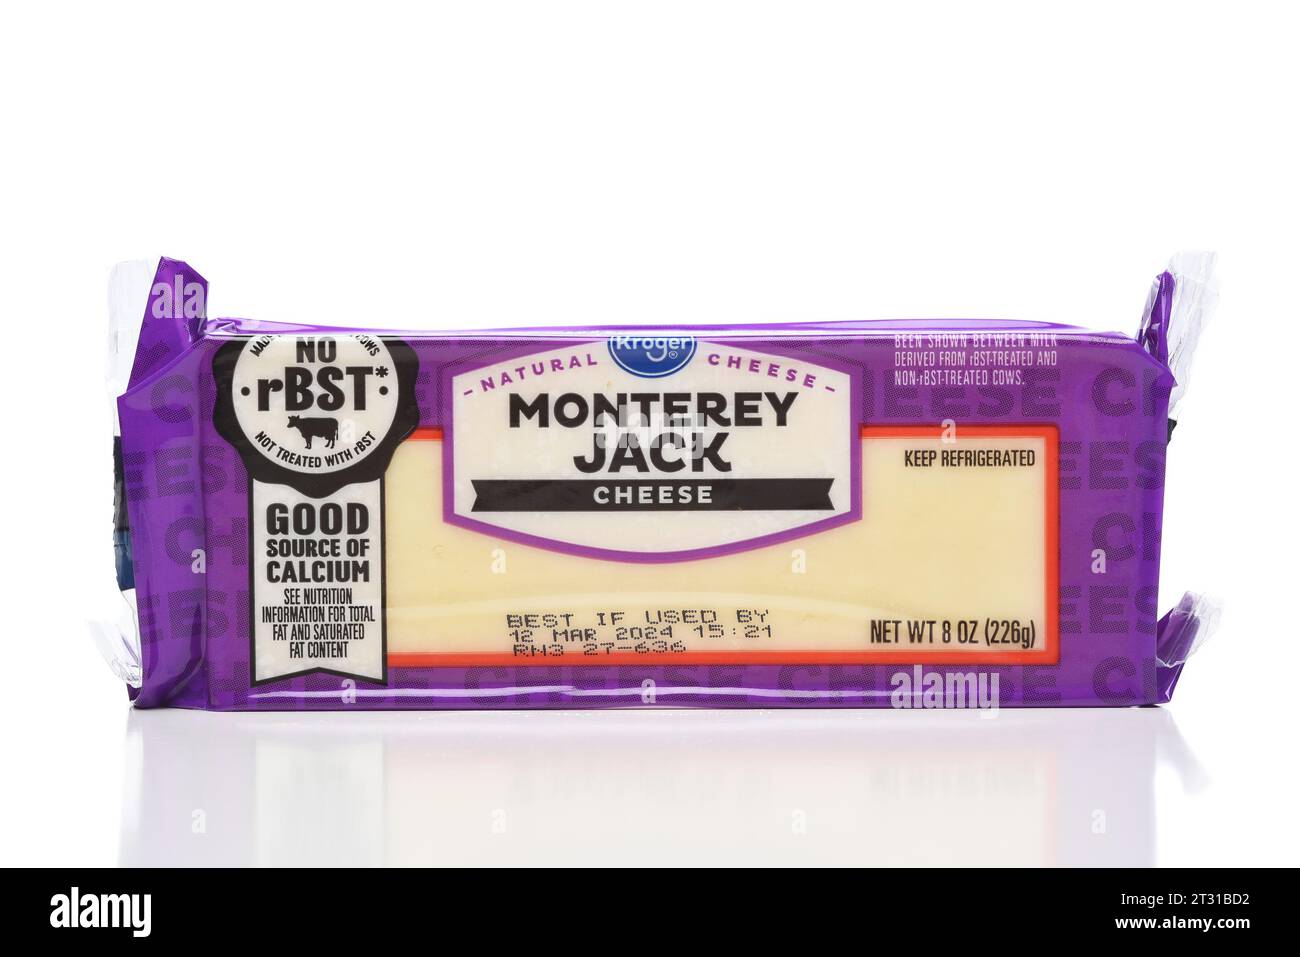 IRVINE, CALIFORNIA - 19 OCT 2023: A package of Kroger Monterey Jack Cheese. Stock Photo